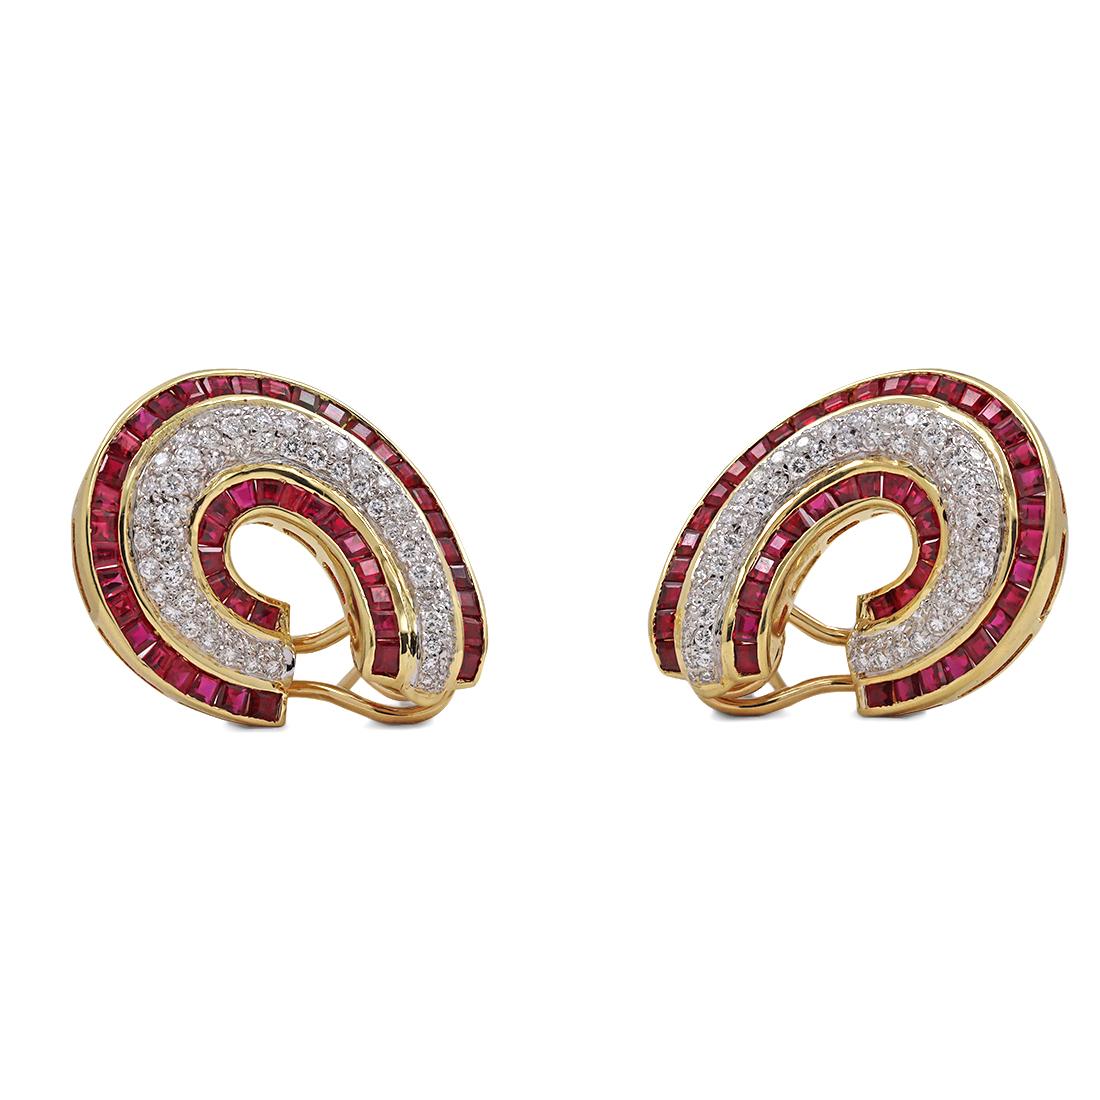 Women's or Men's Vintage Yellow Gold Diamond and Ruby Earrings